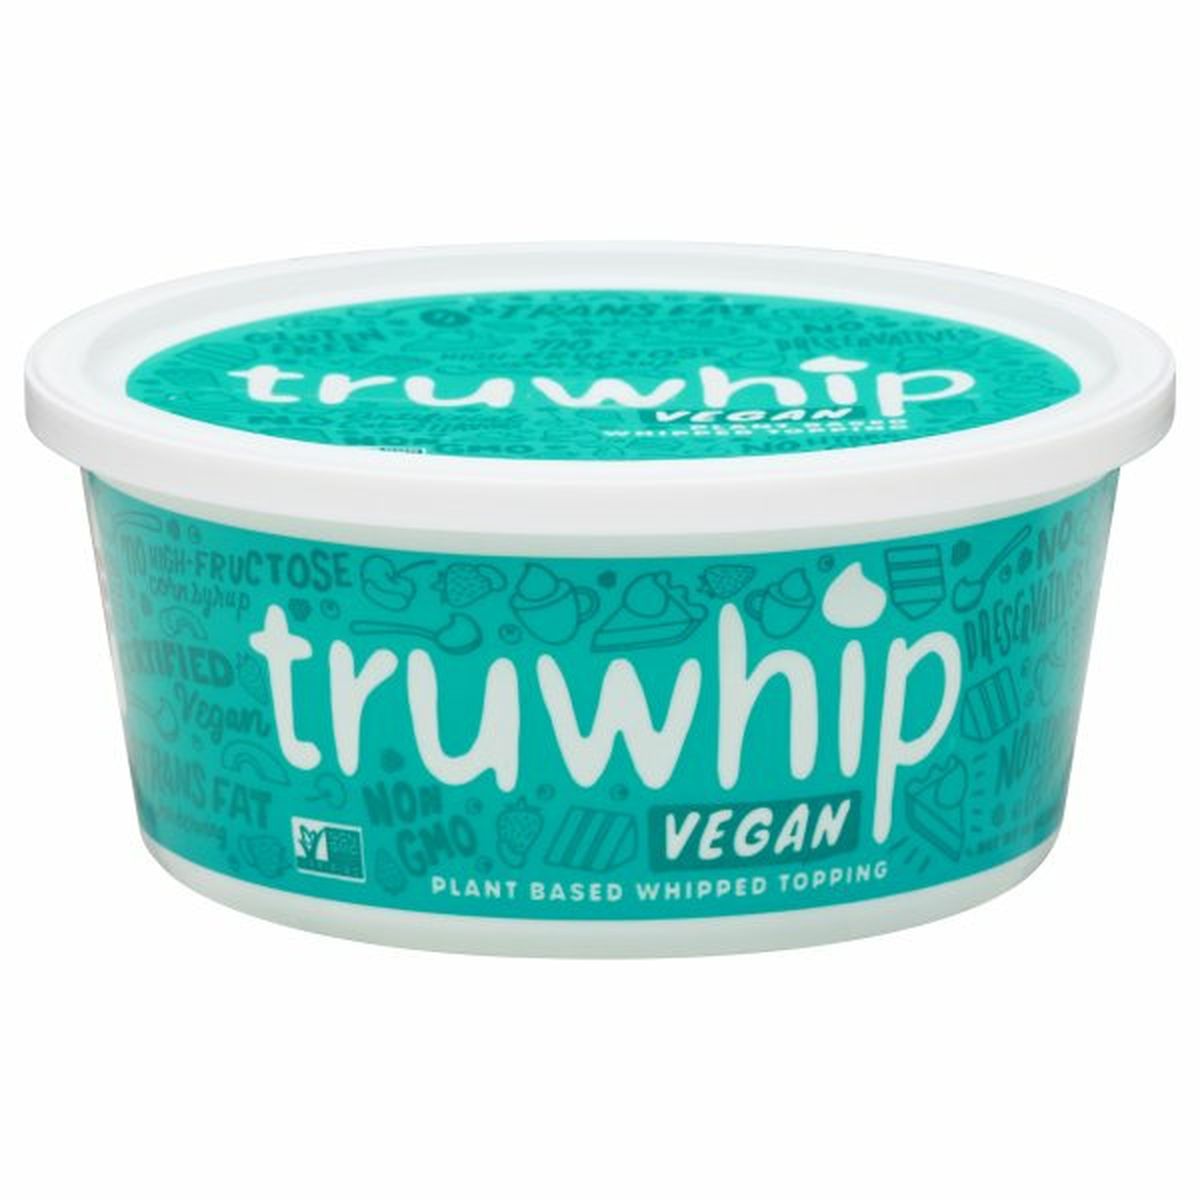 Calories in Truwhip Whipped Topping, Vegan, Plant Based